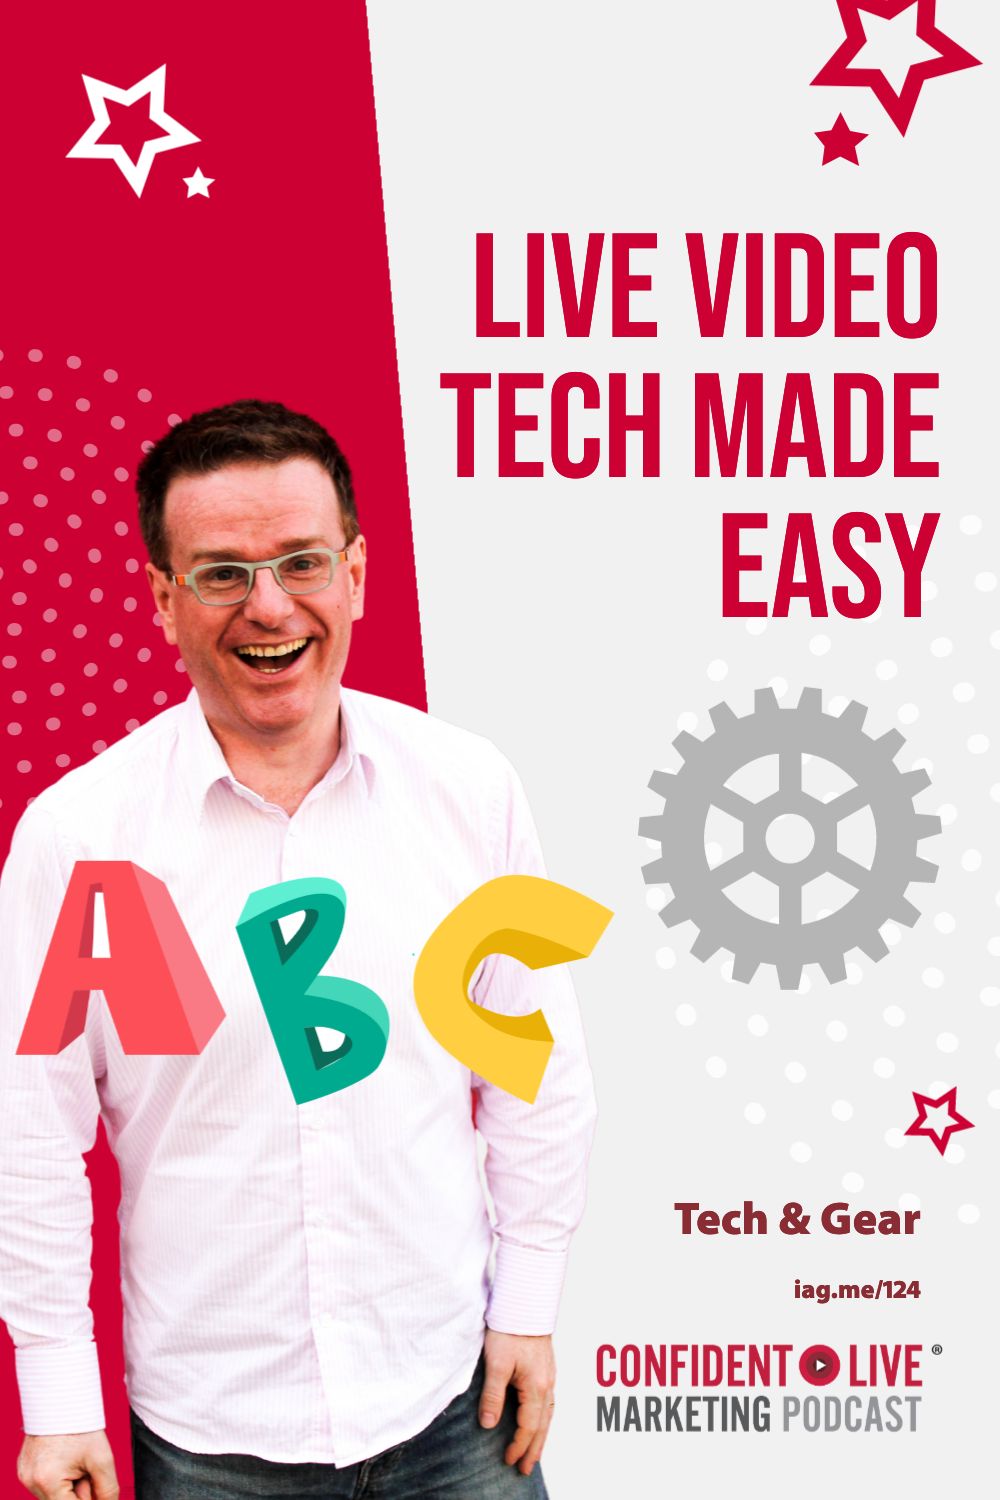 Live Video Tech Made Easy